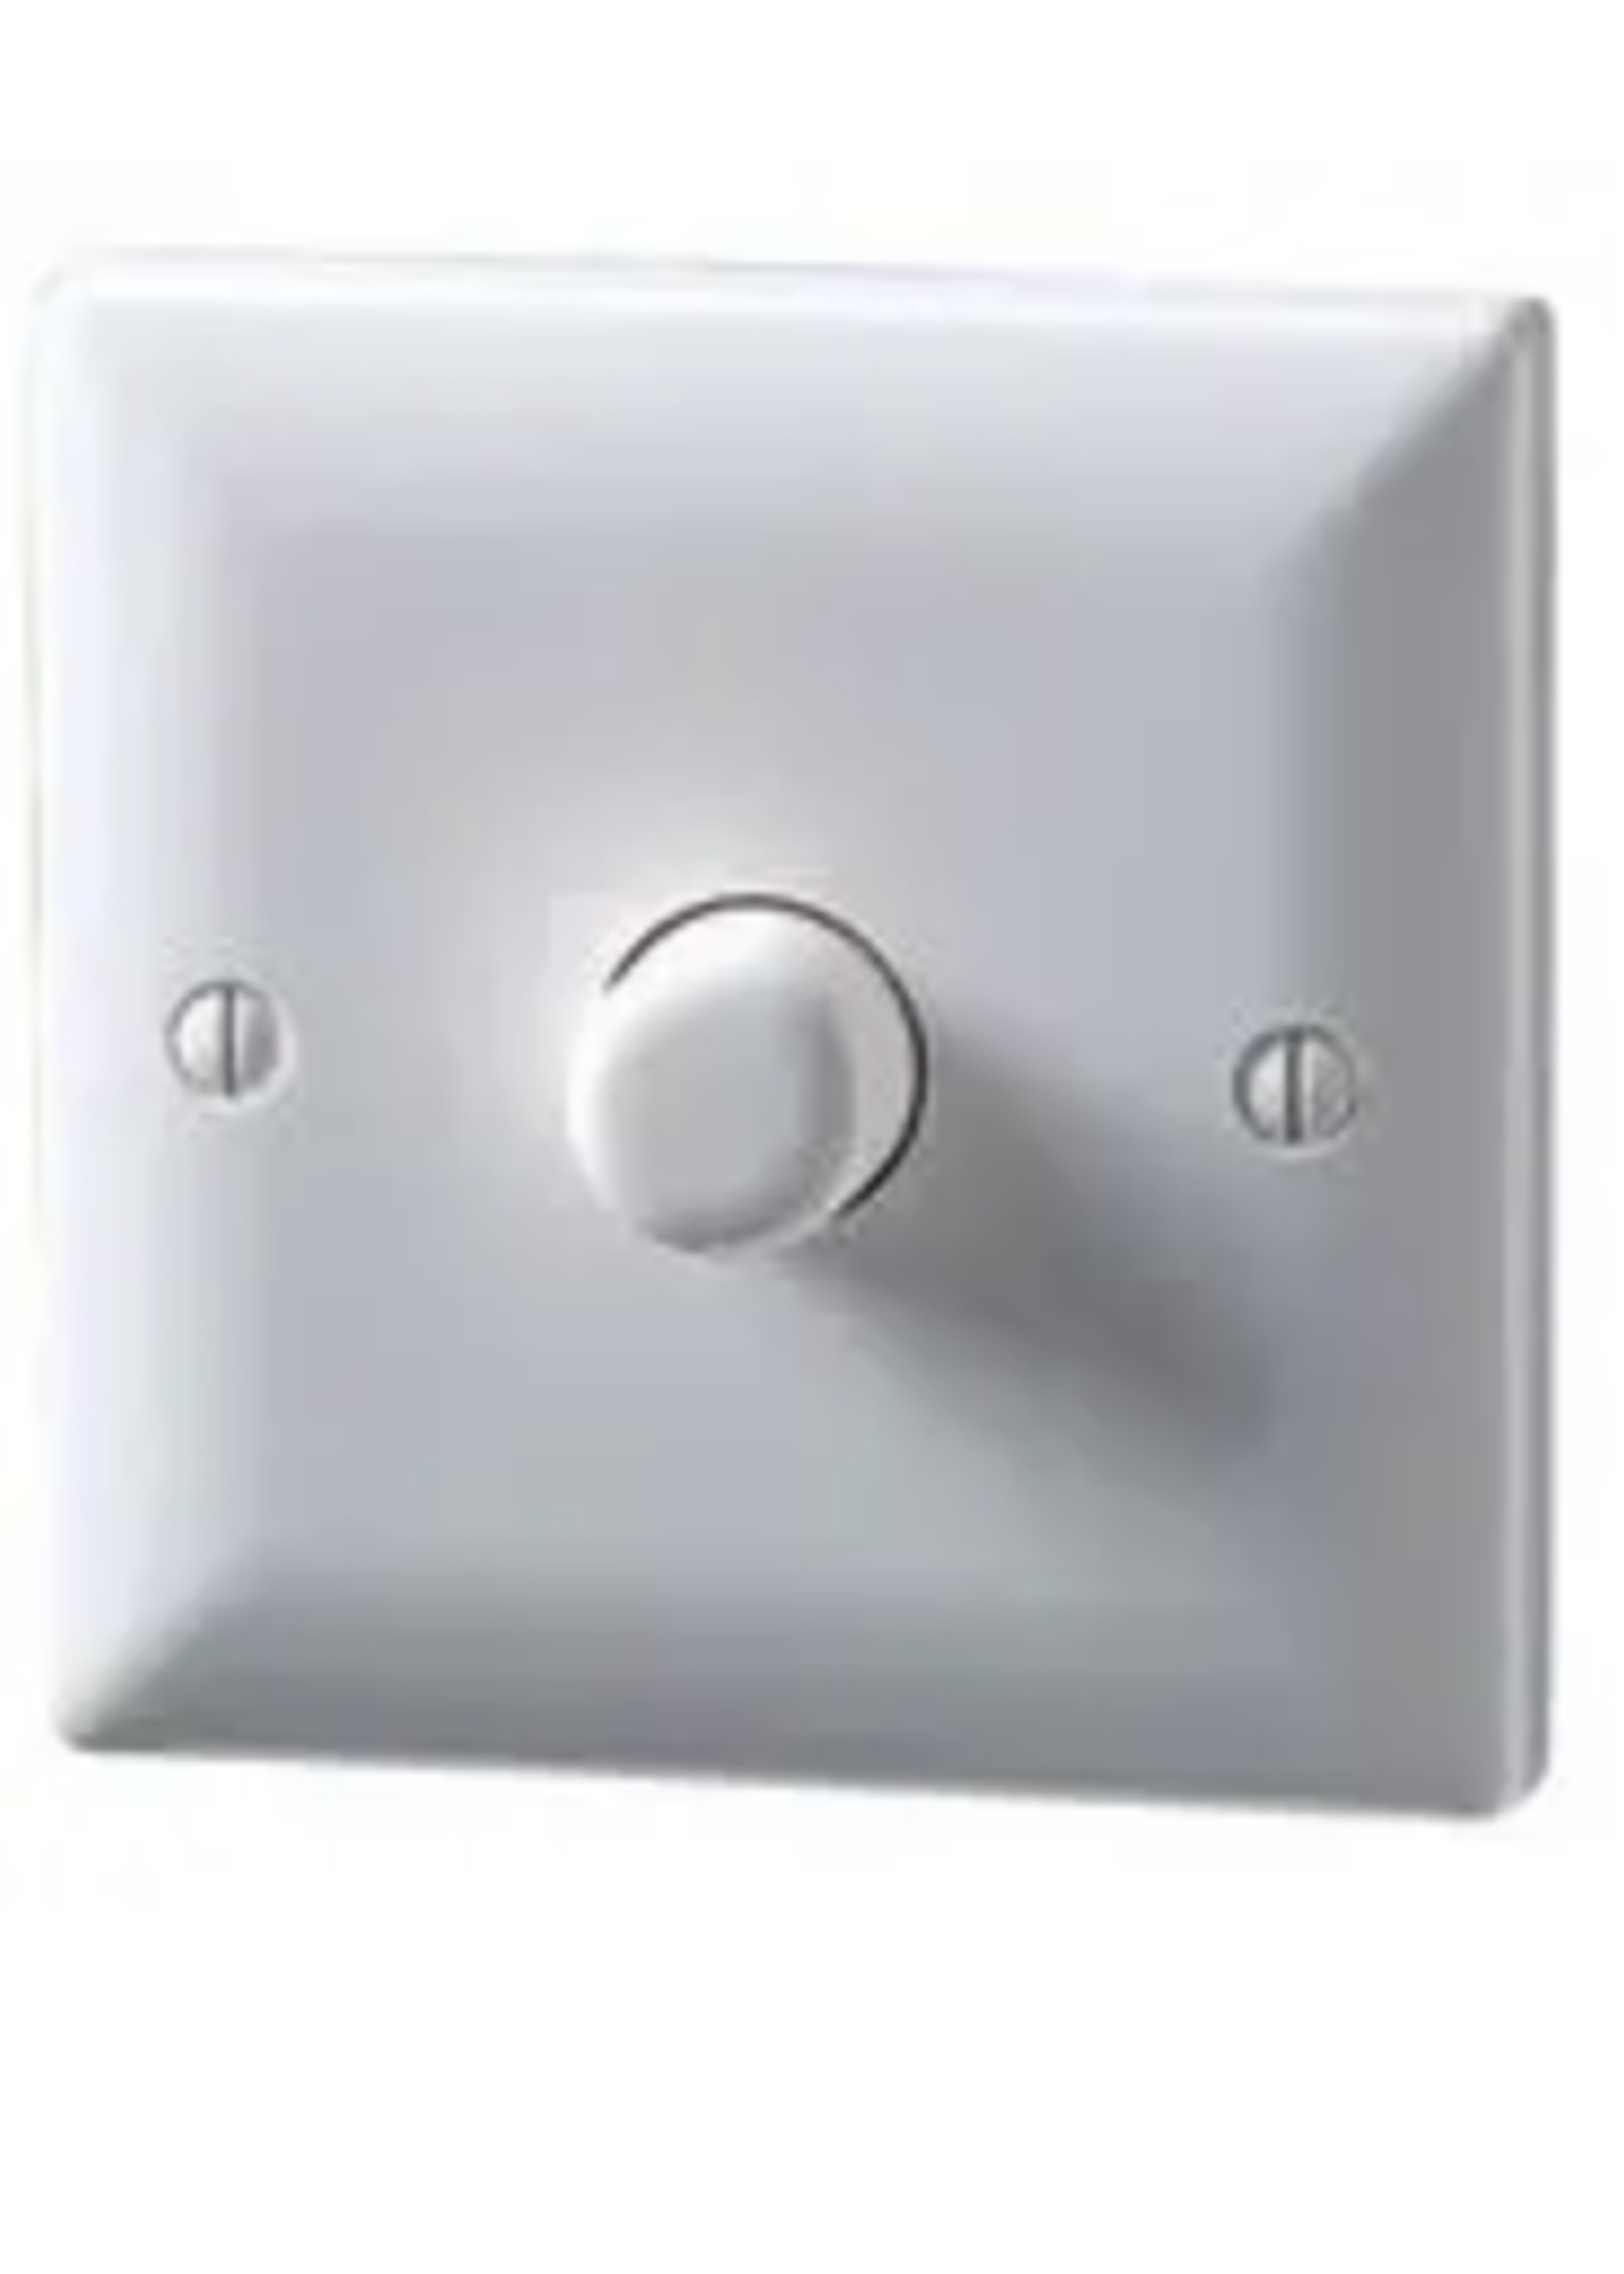 Danlers Rotary & Push LED Dimmer Switch 1 Gang